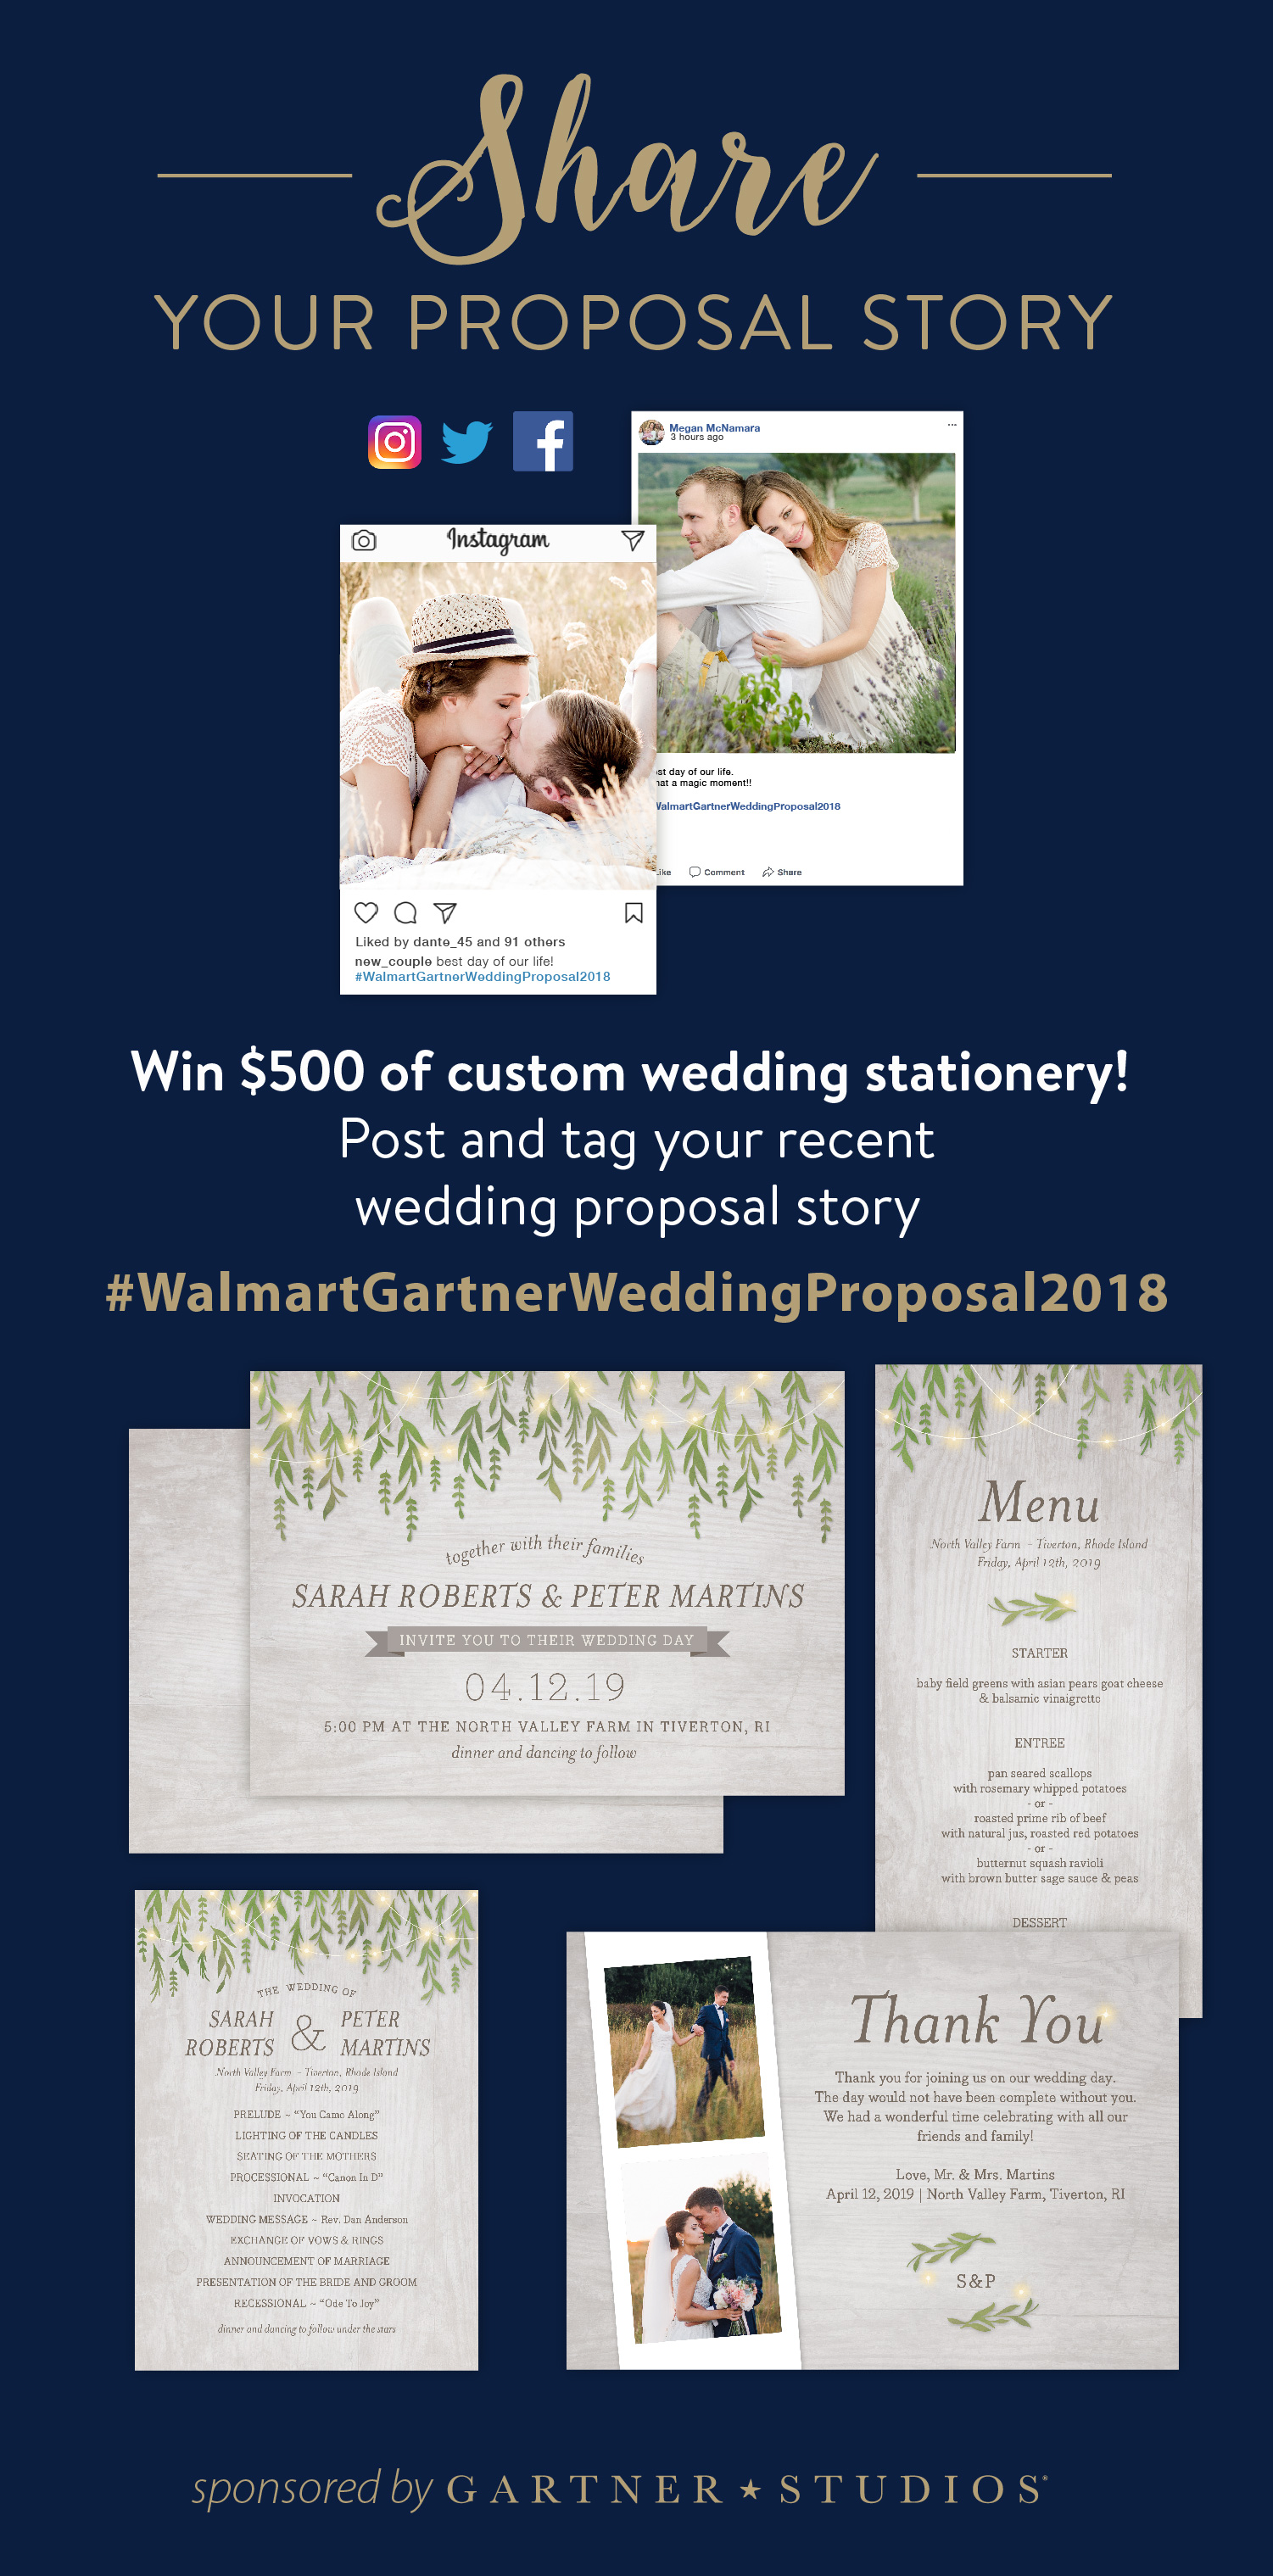 Share your proposal story and win $500!